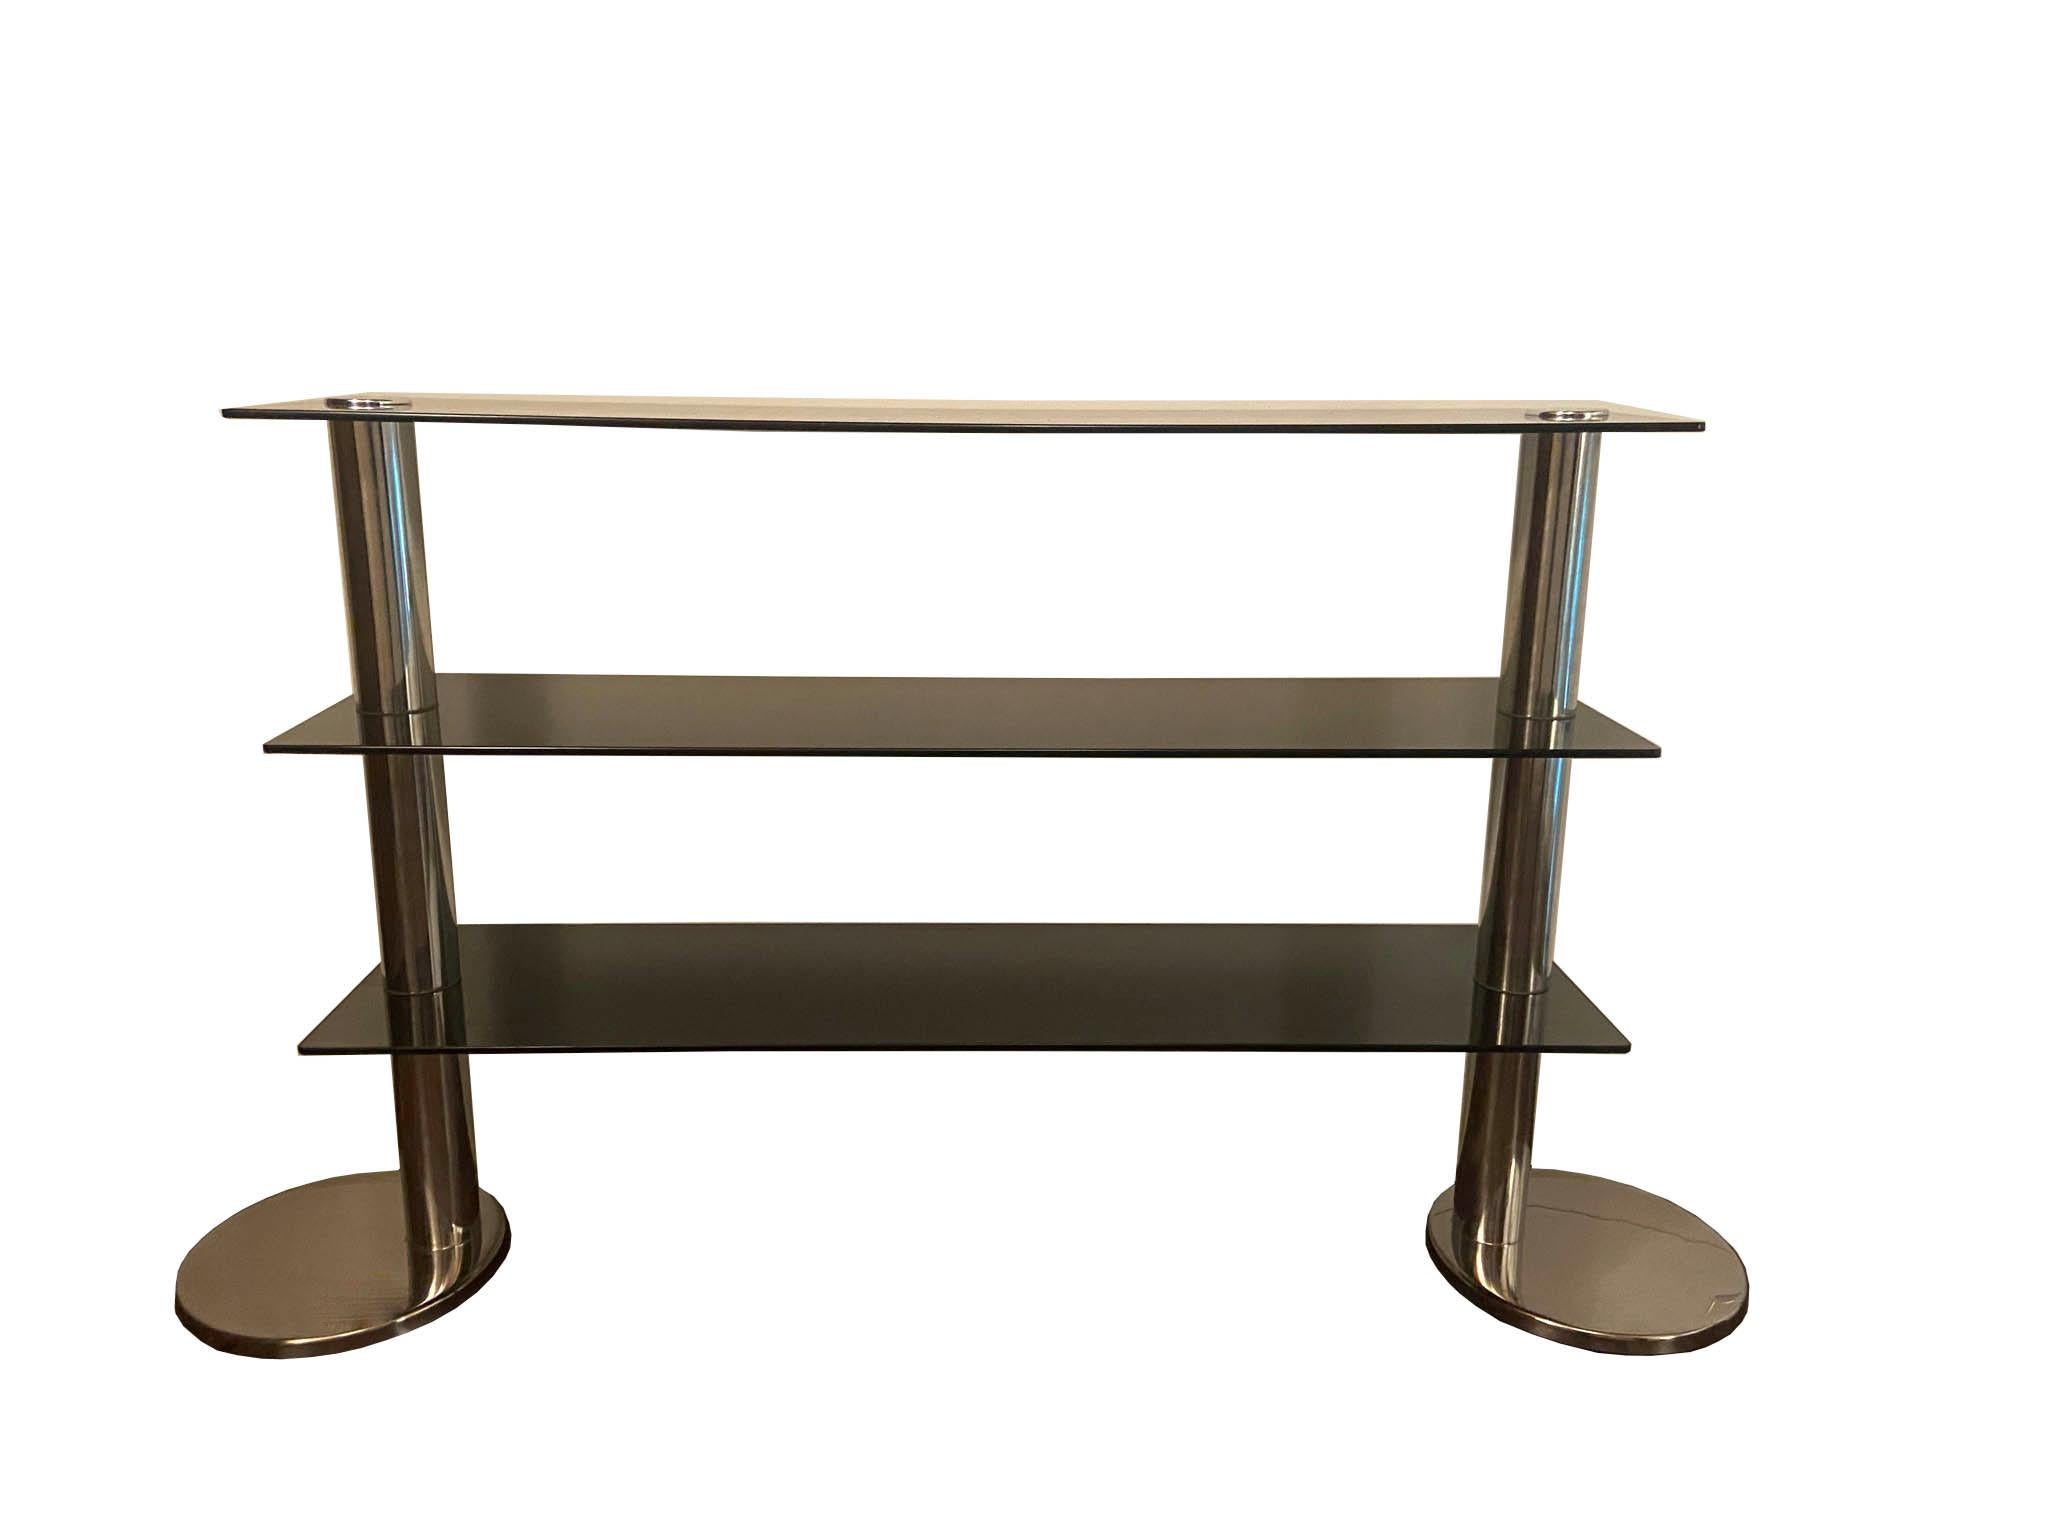 A chrome and glass console table or TV and entertainment stand with three shelves and rounded chrome bases. Very well-made and stabile a great design from the period and ready for a number of application.